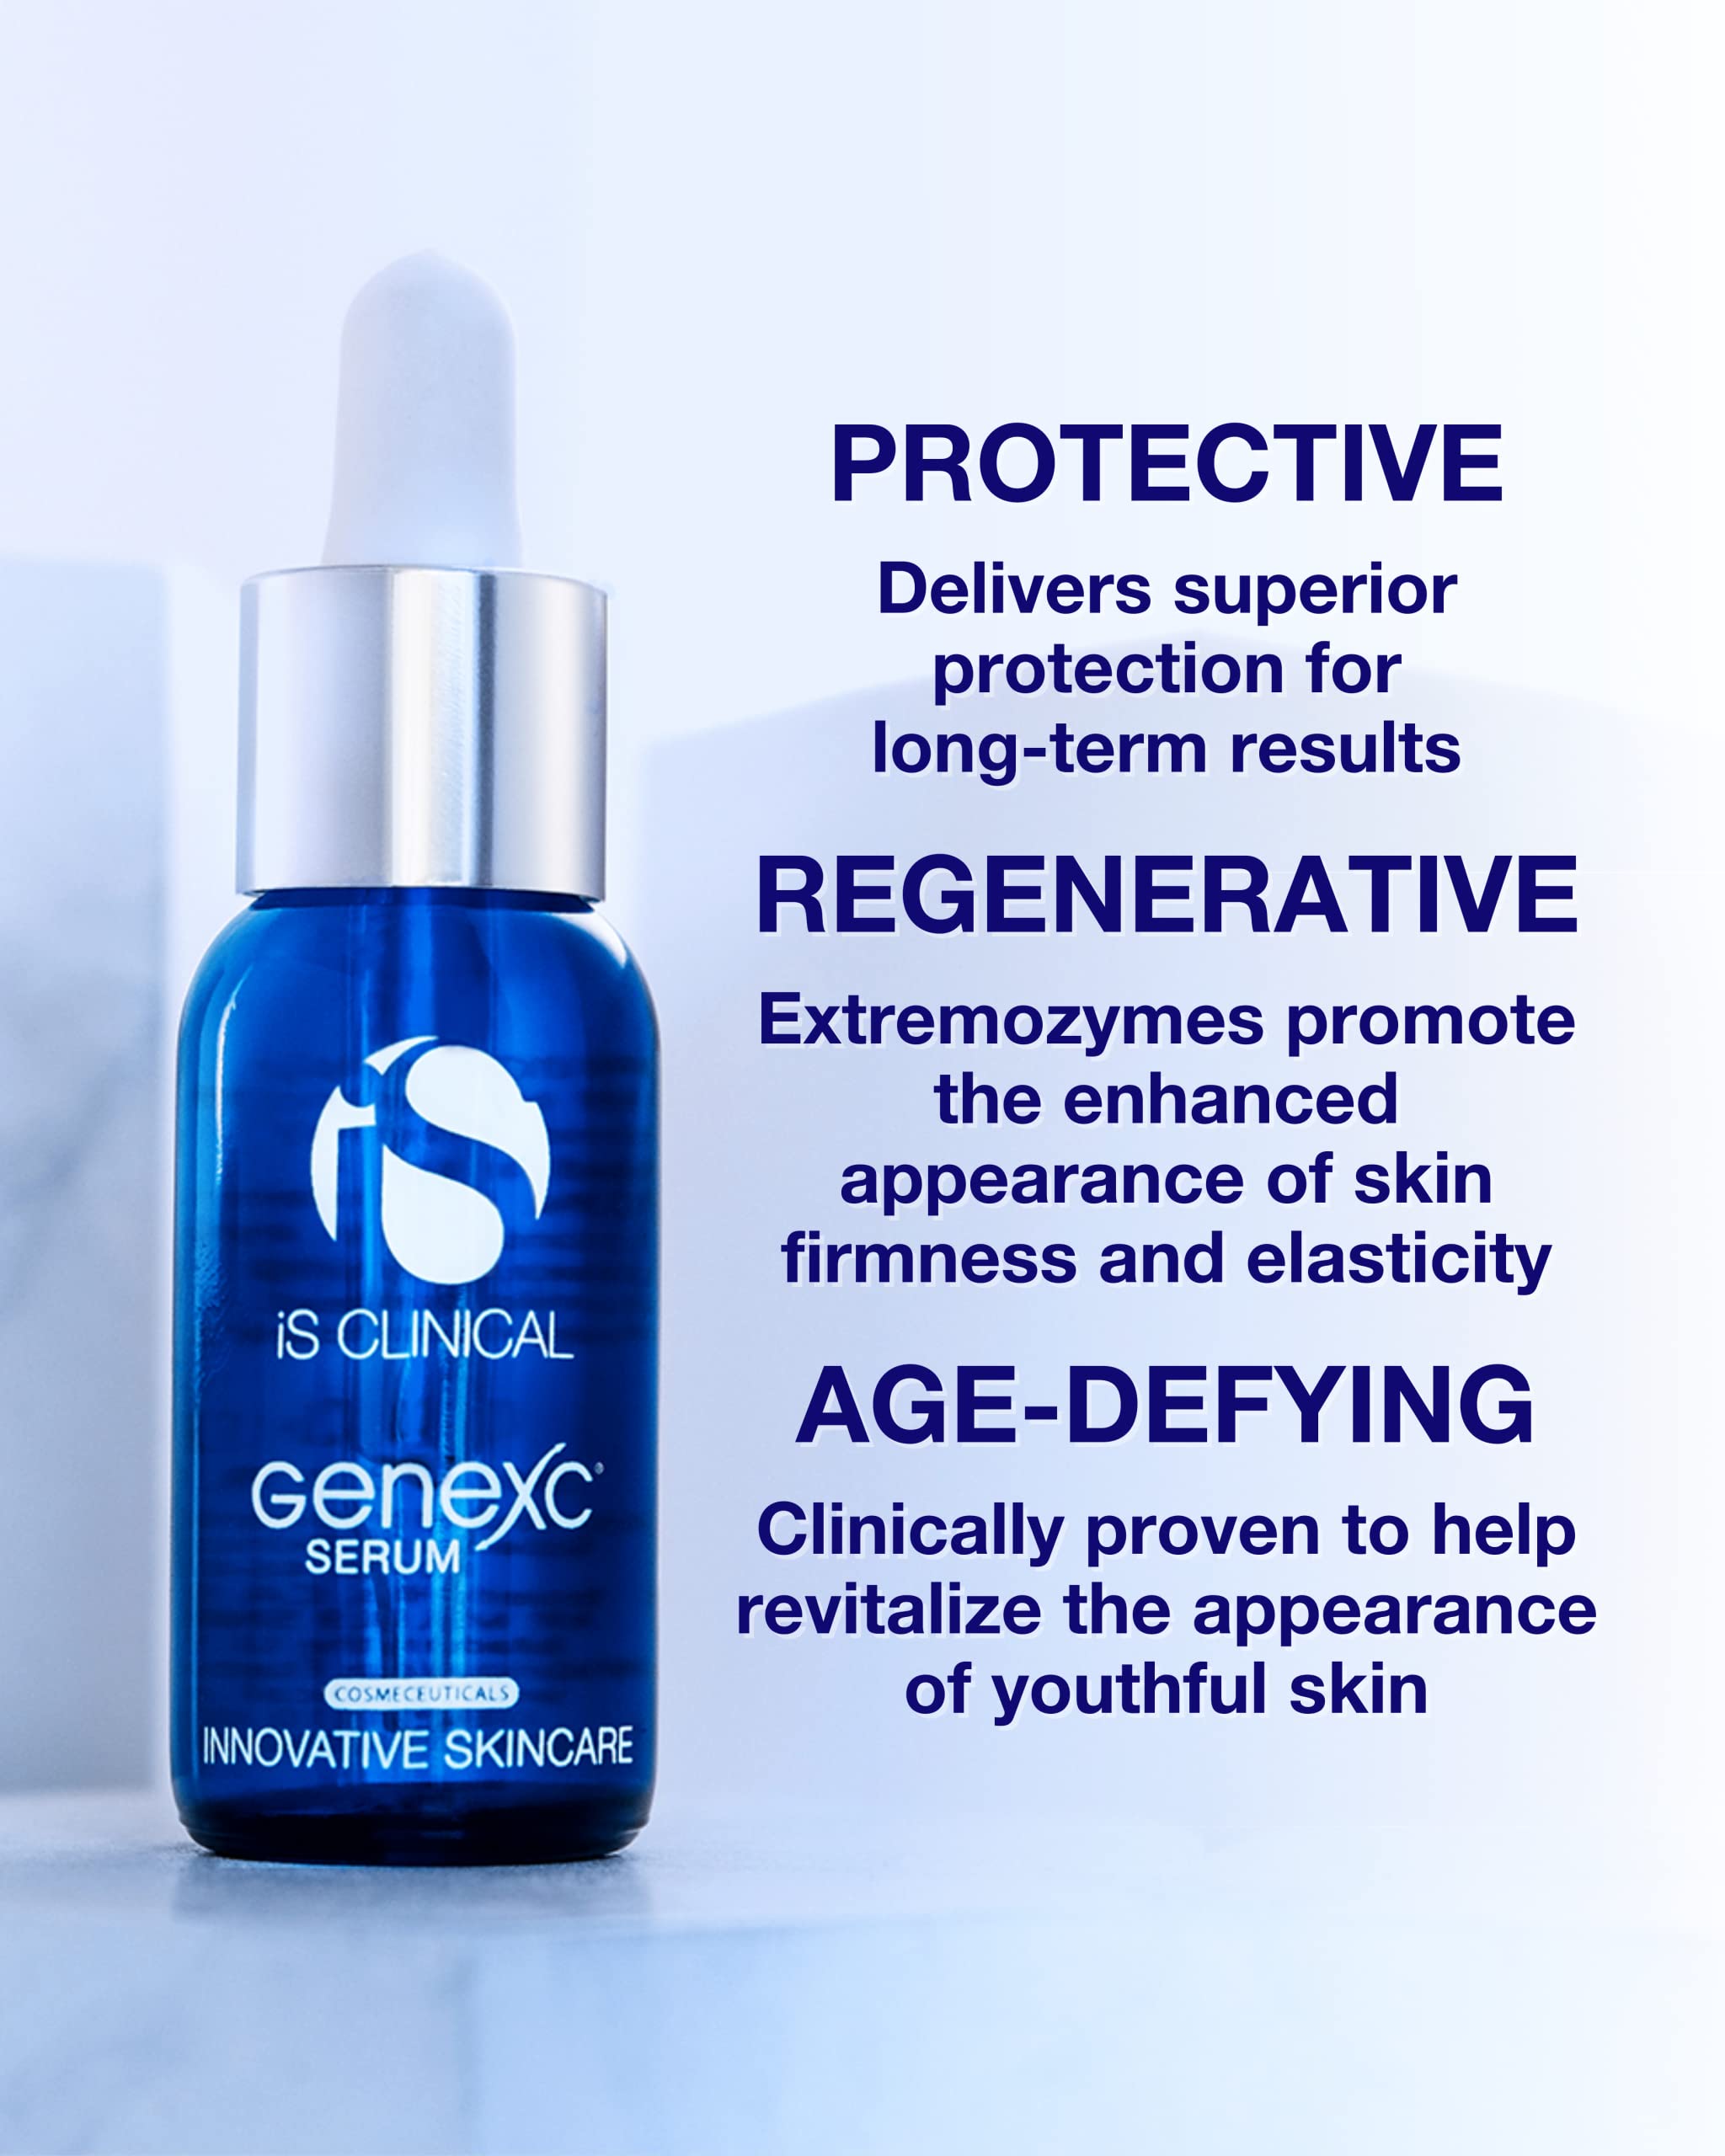 iS CLINICAL GENEXC SERUM, Vitamin C Serum, Antioxidant serum for face; Promotes cell regeneration, Youthful looking skin.